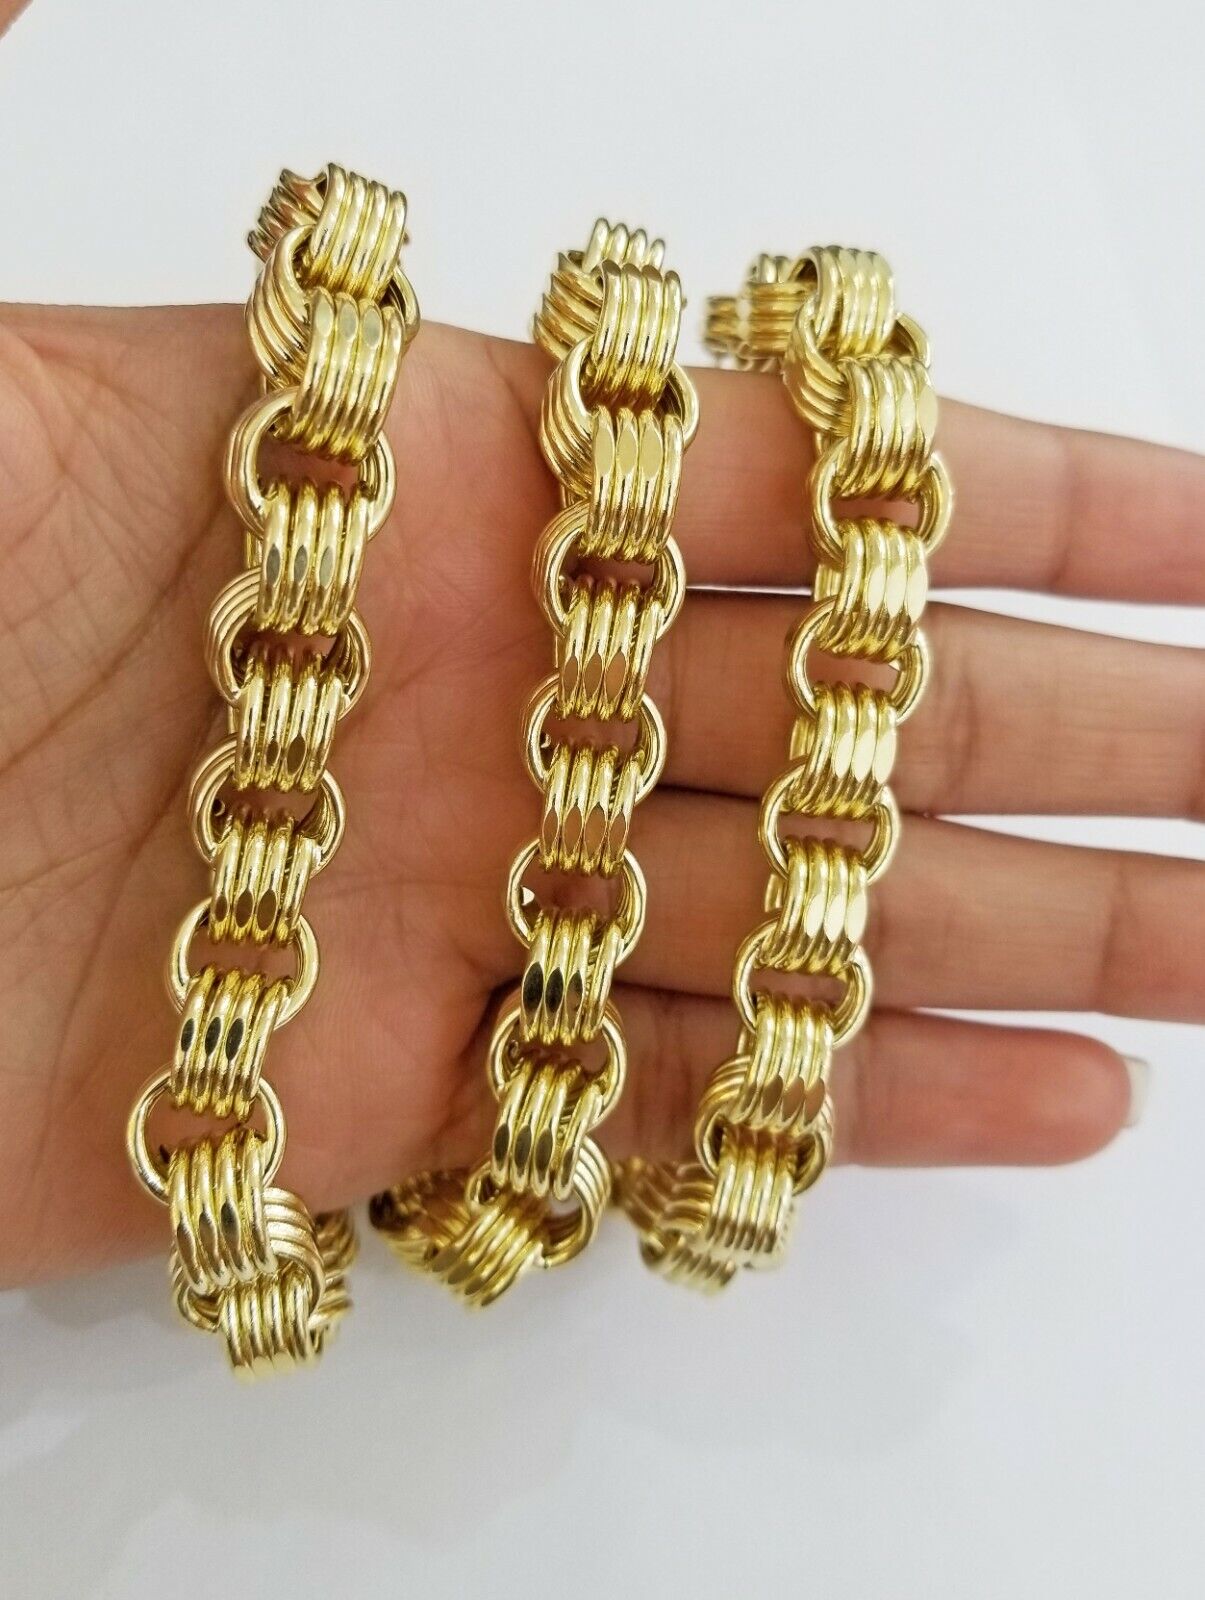 Real 10k Gold Byzantine Chain 11mm 26" Inch Men's yellow gold necklace 10kt